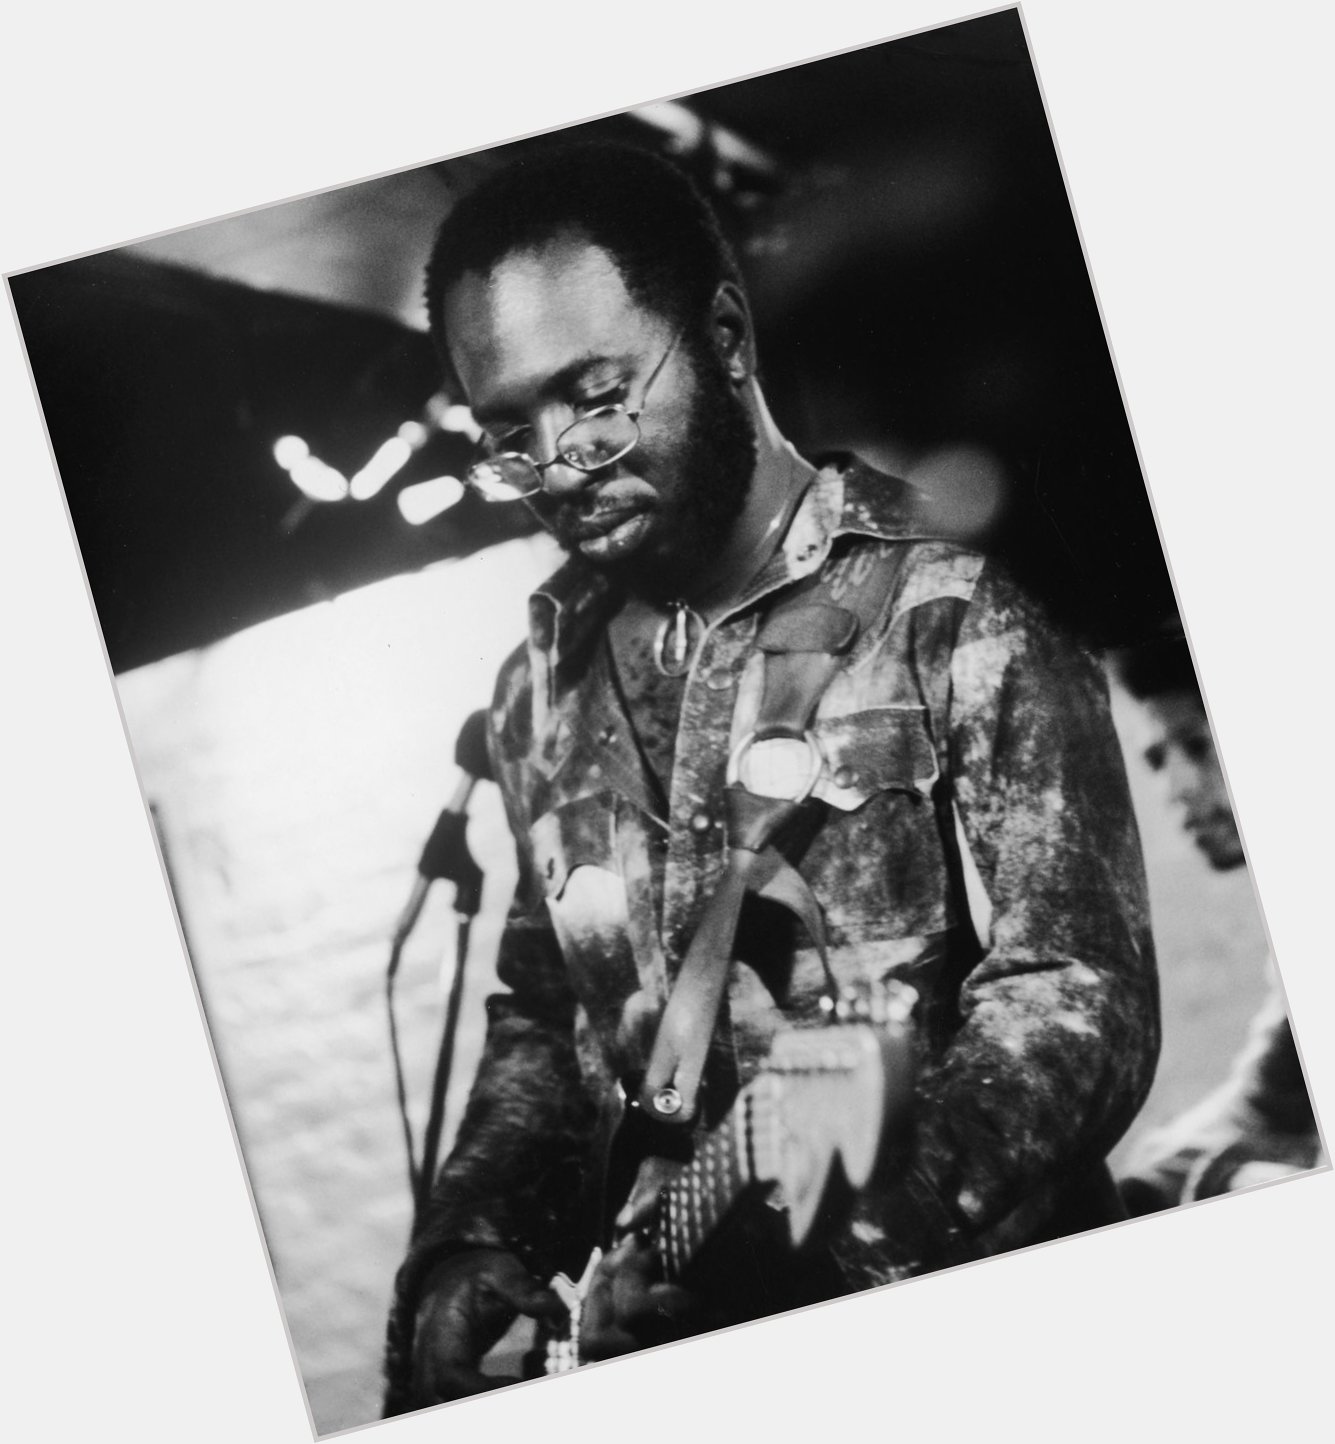 Happy birthday shoutout to singer Curtis Mayfield!! 